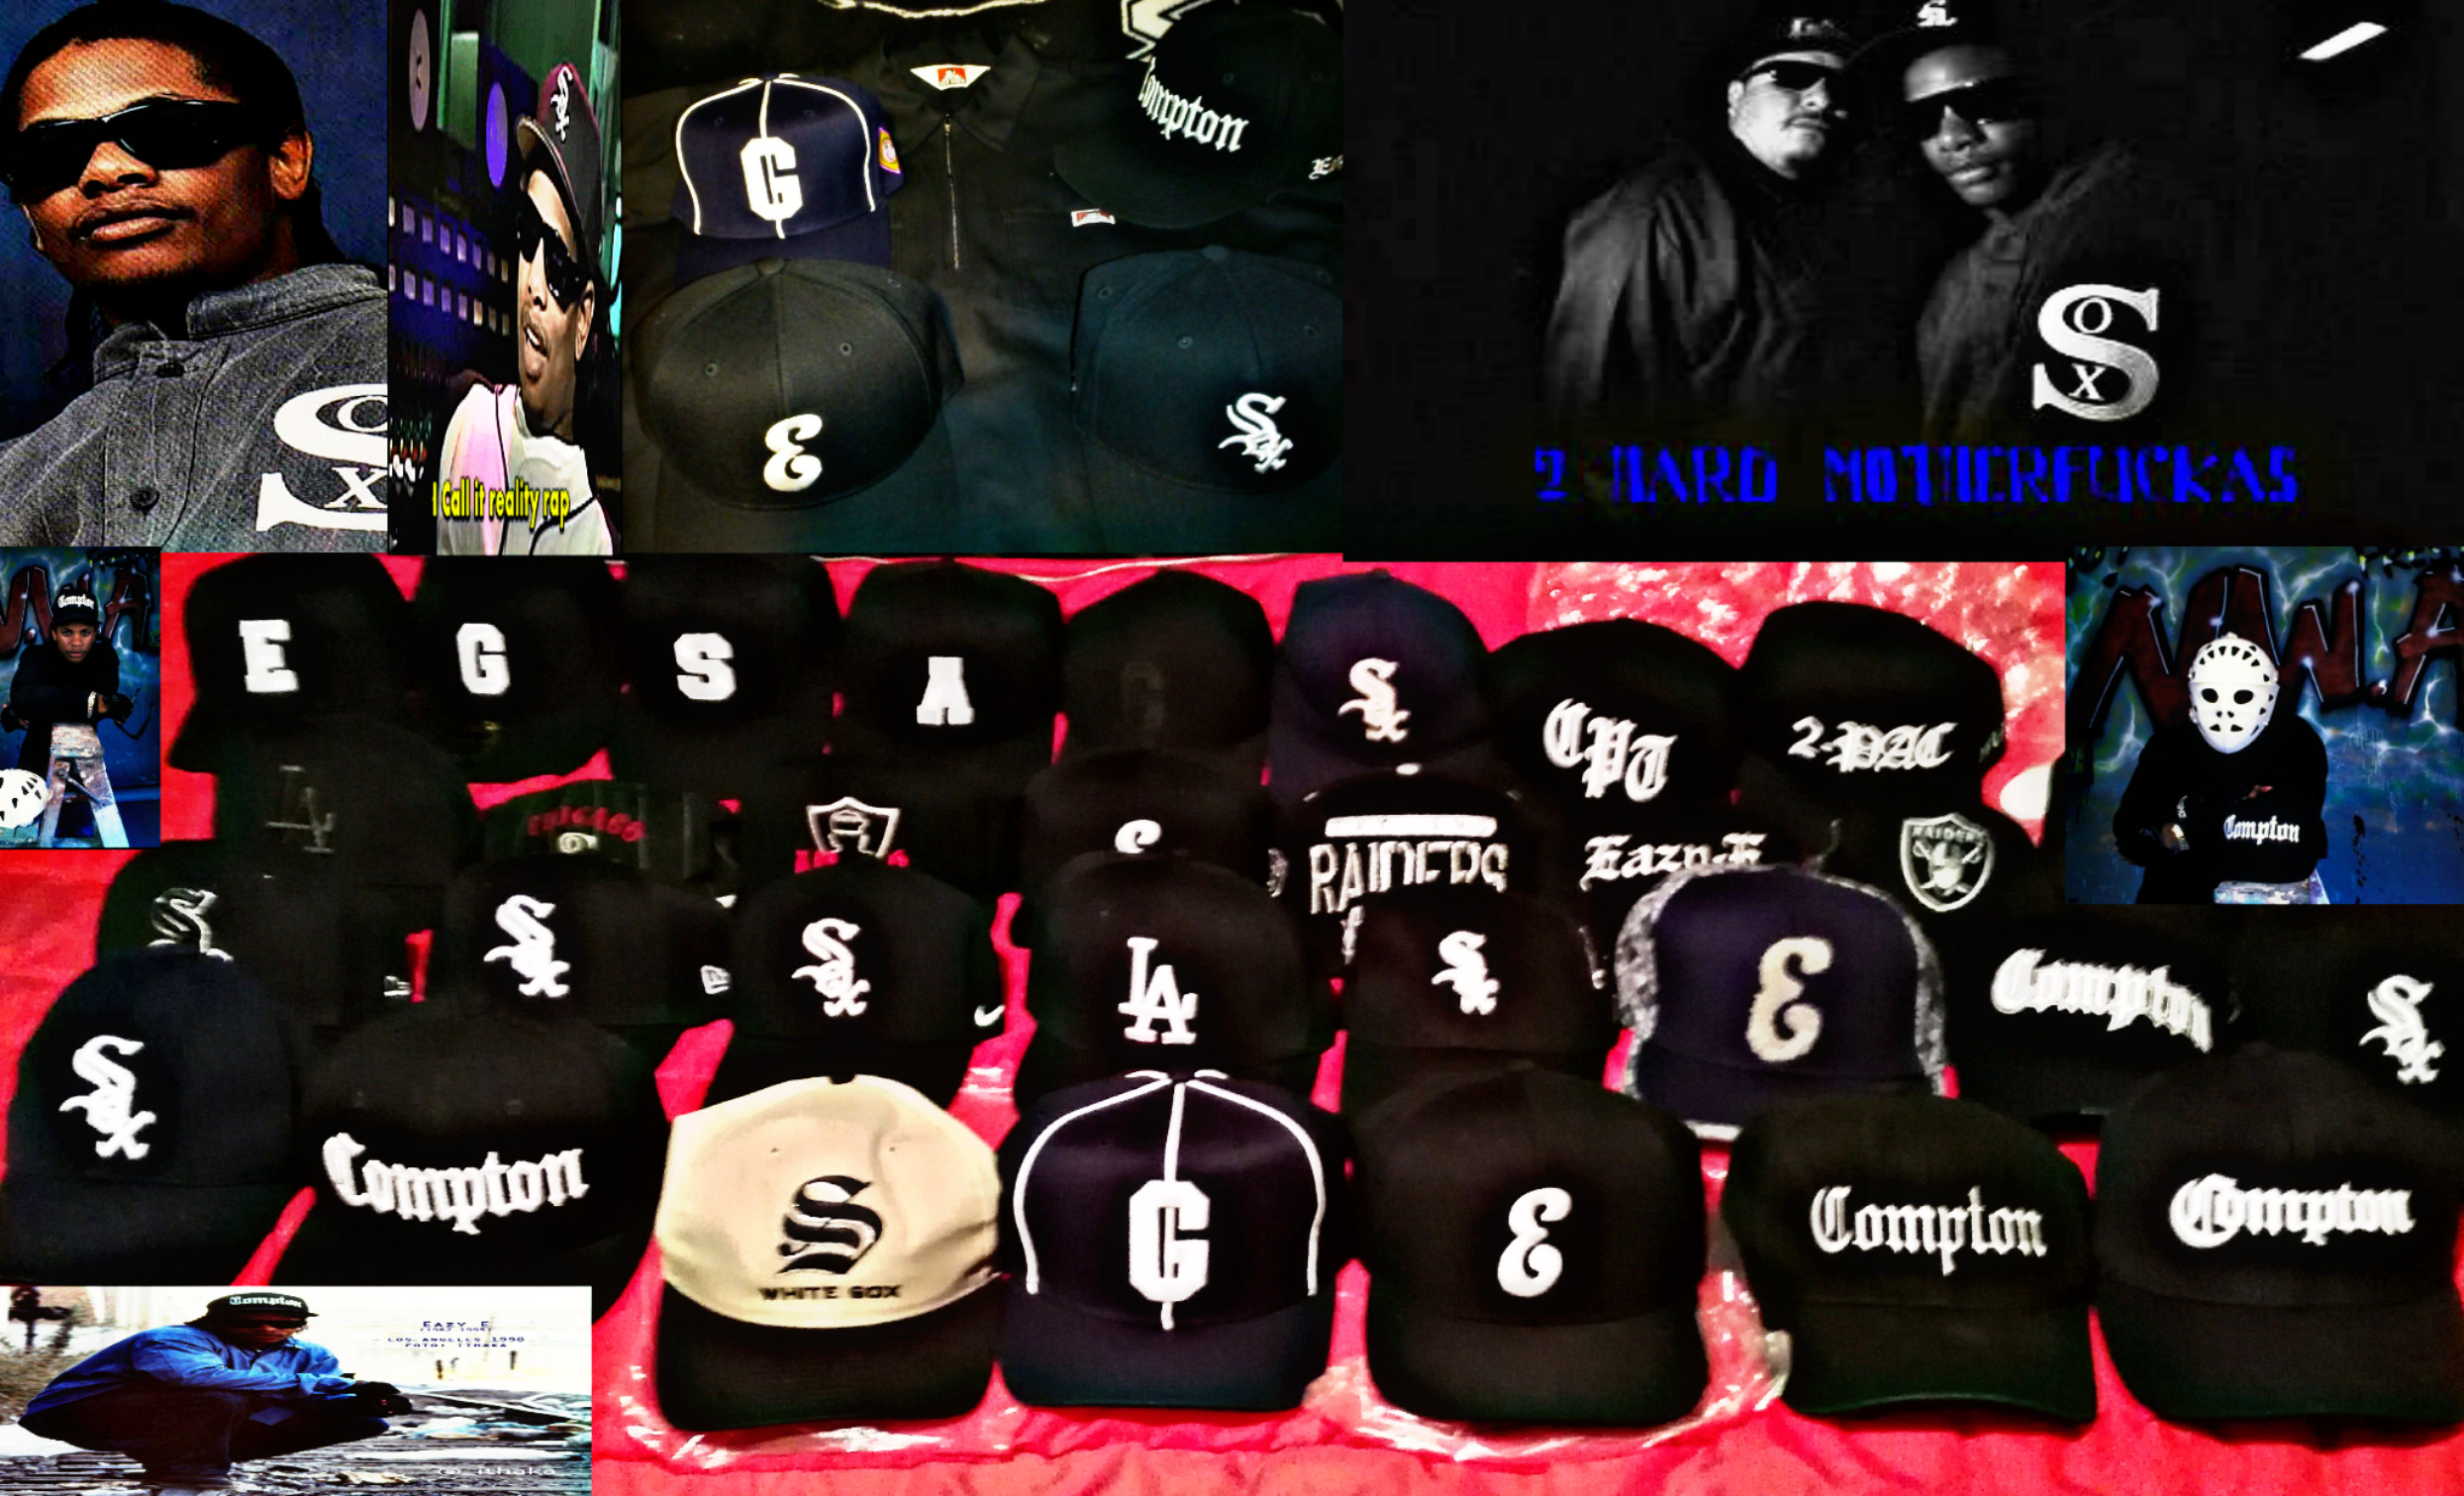 Eazye187 images eazy e compton hat s HD wallpaper and background photos